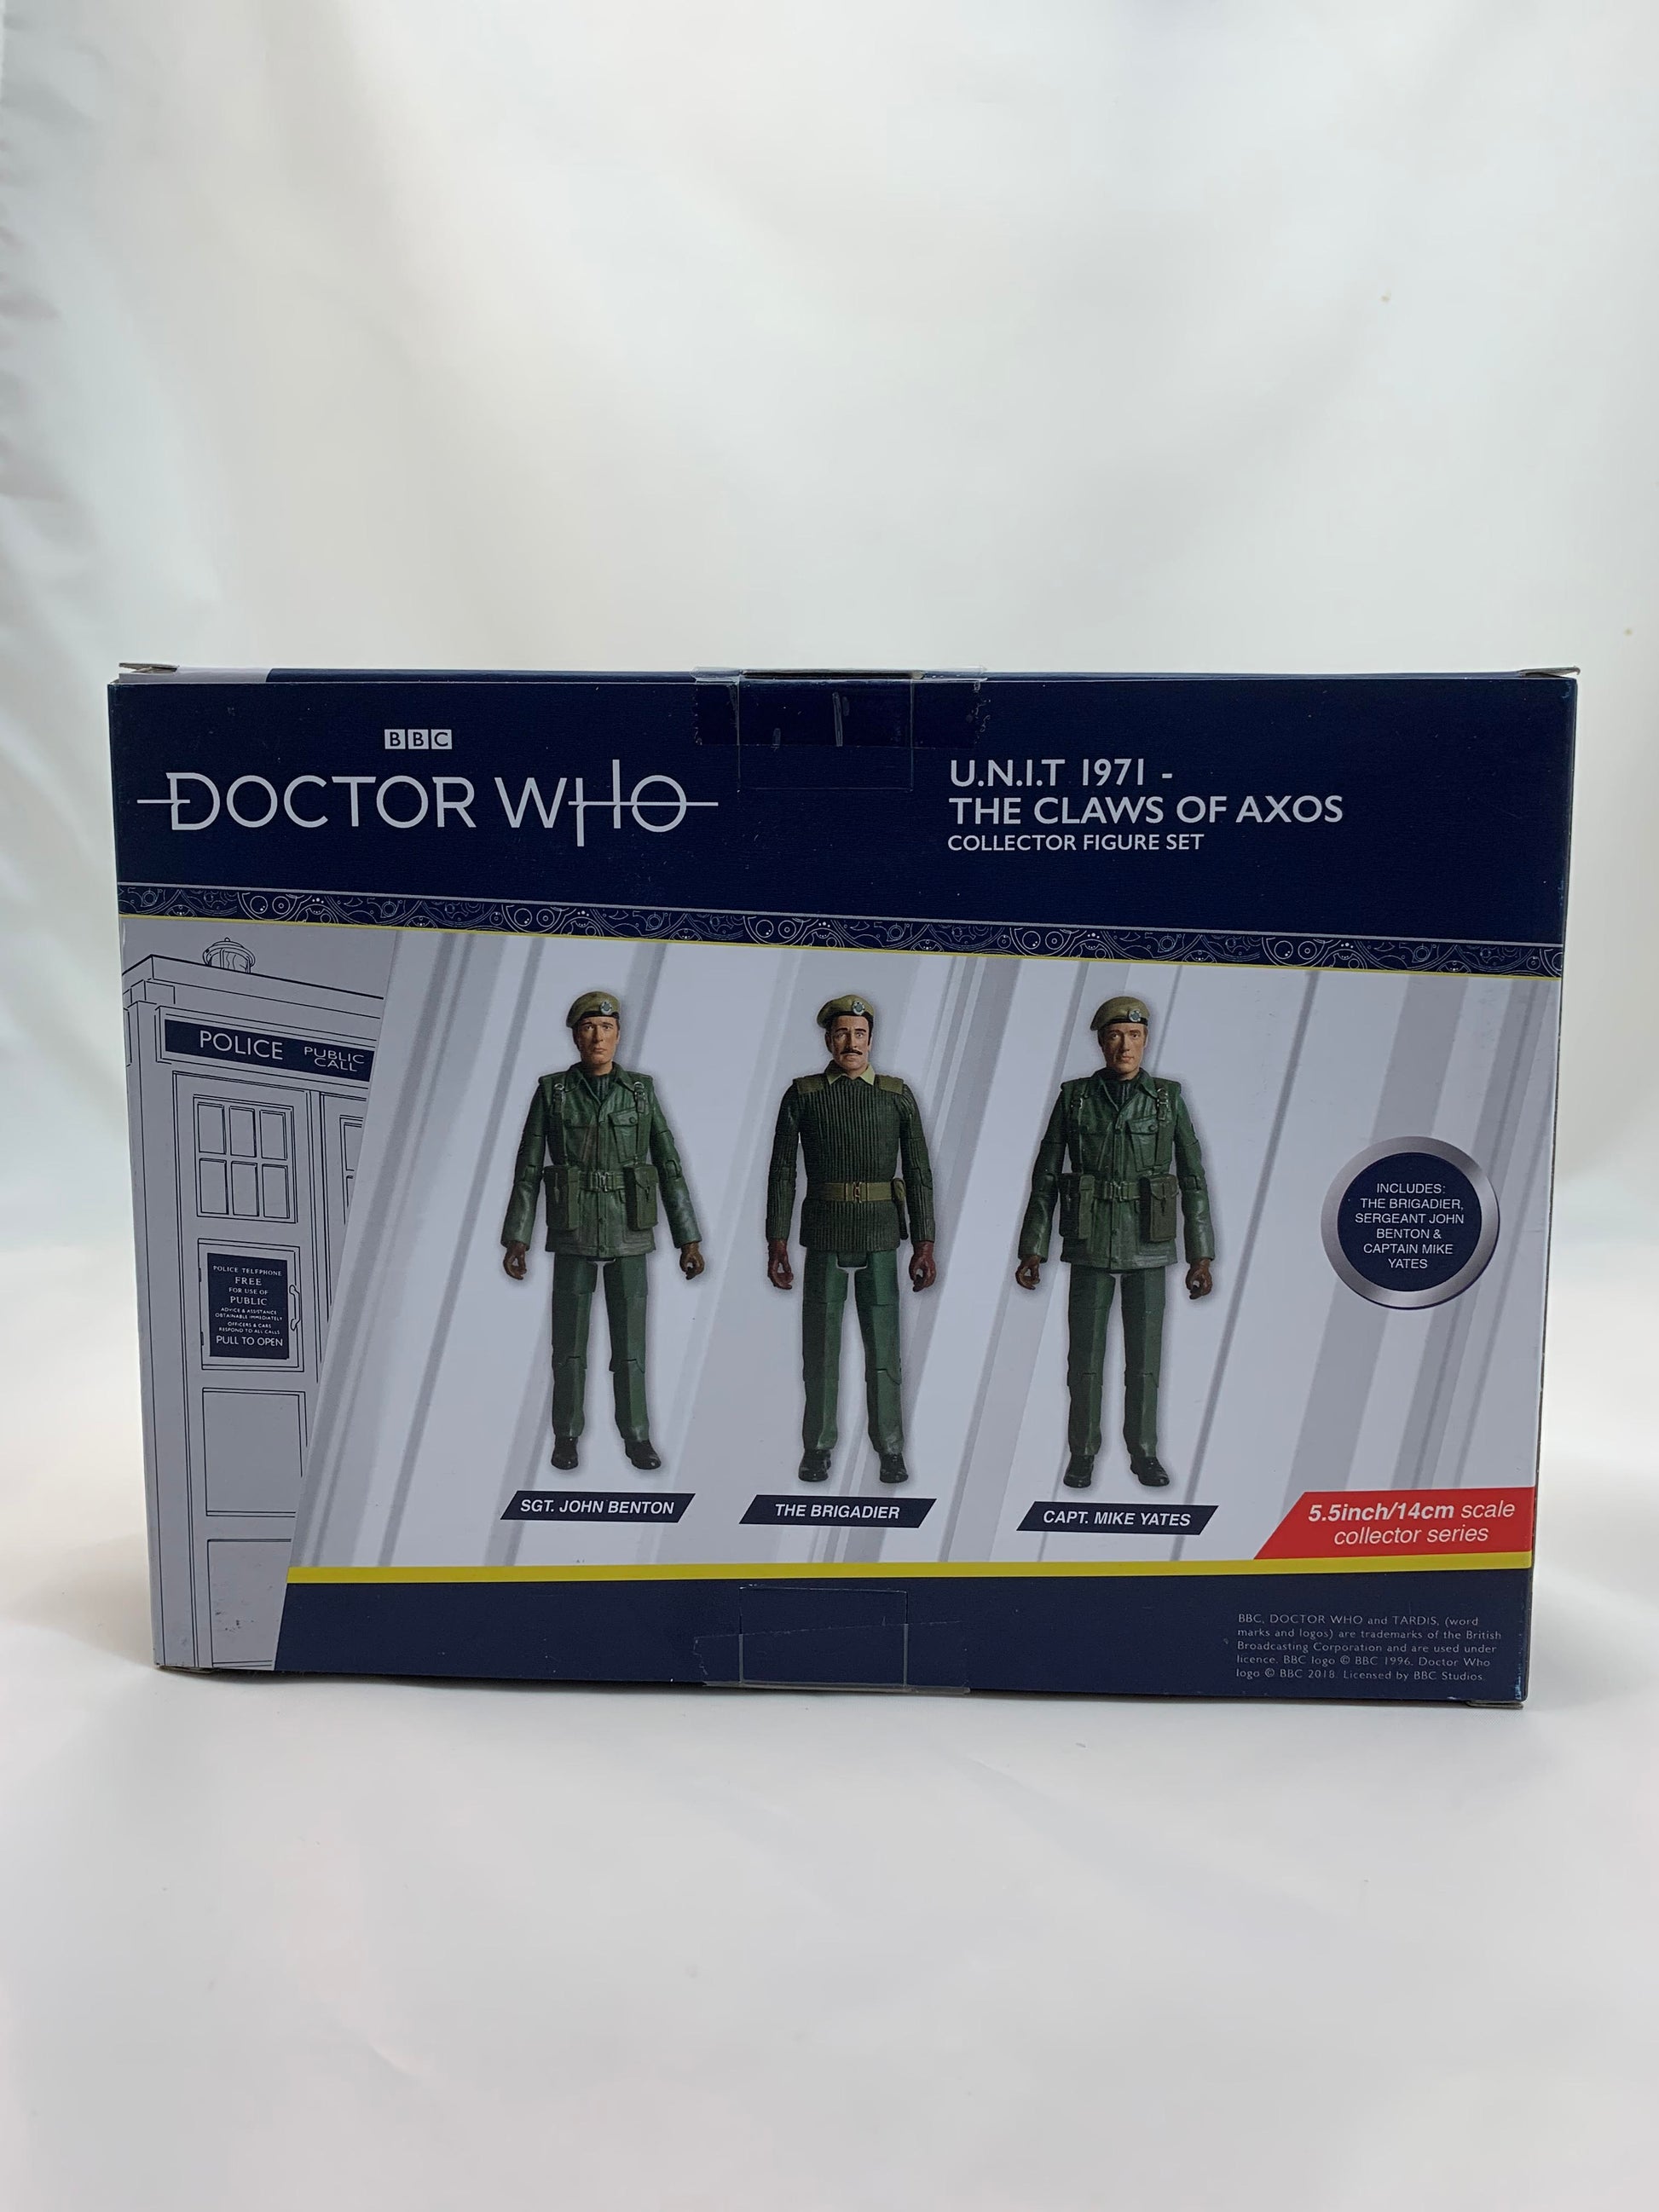 Character Doctor Who UNIT 1971 - The Claws Of Axos Box Set - MIB